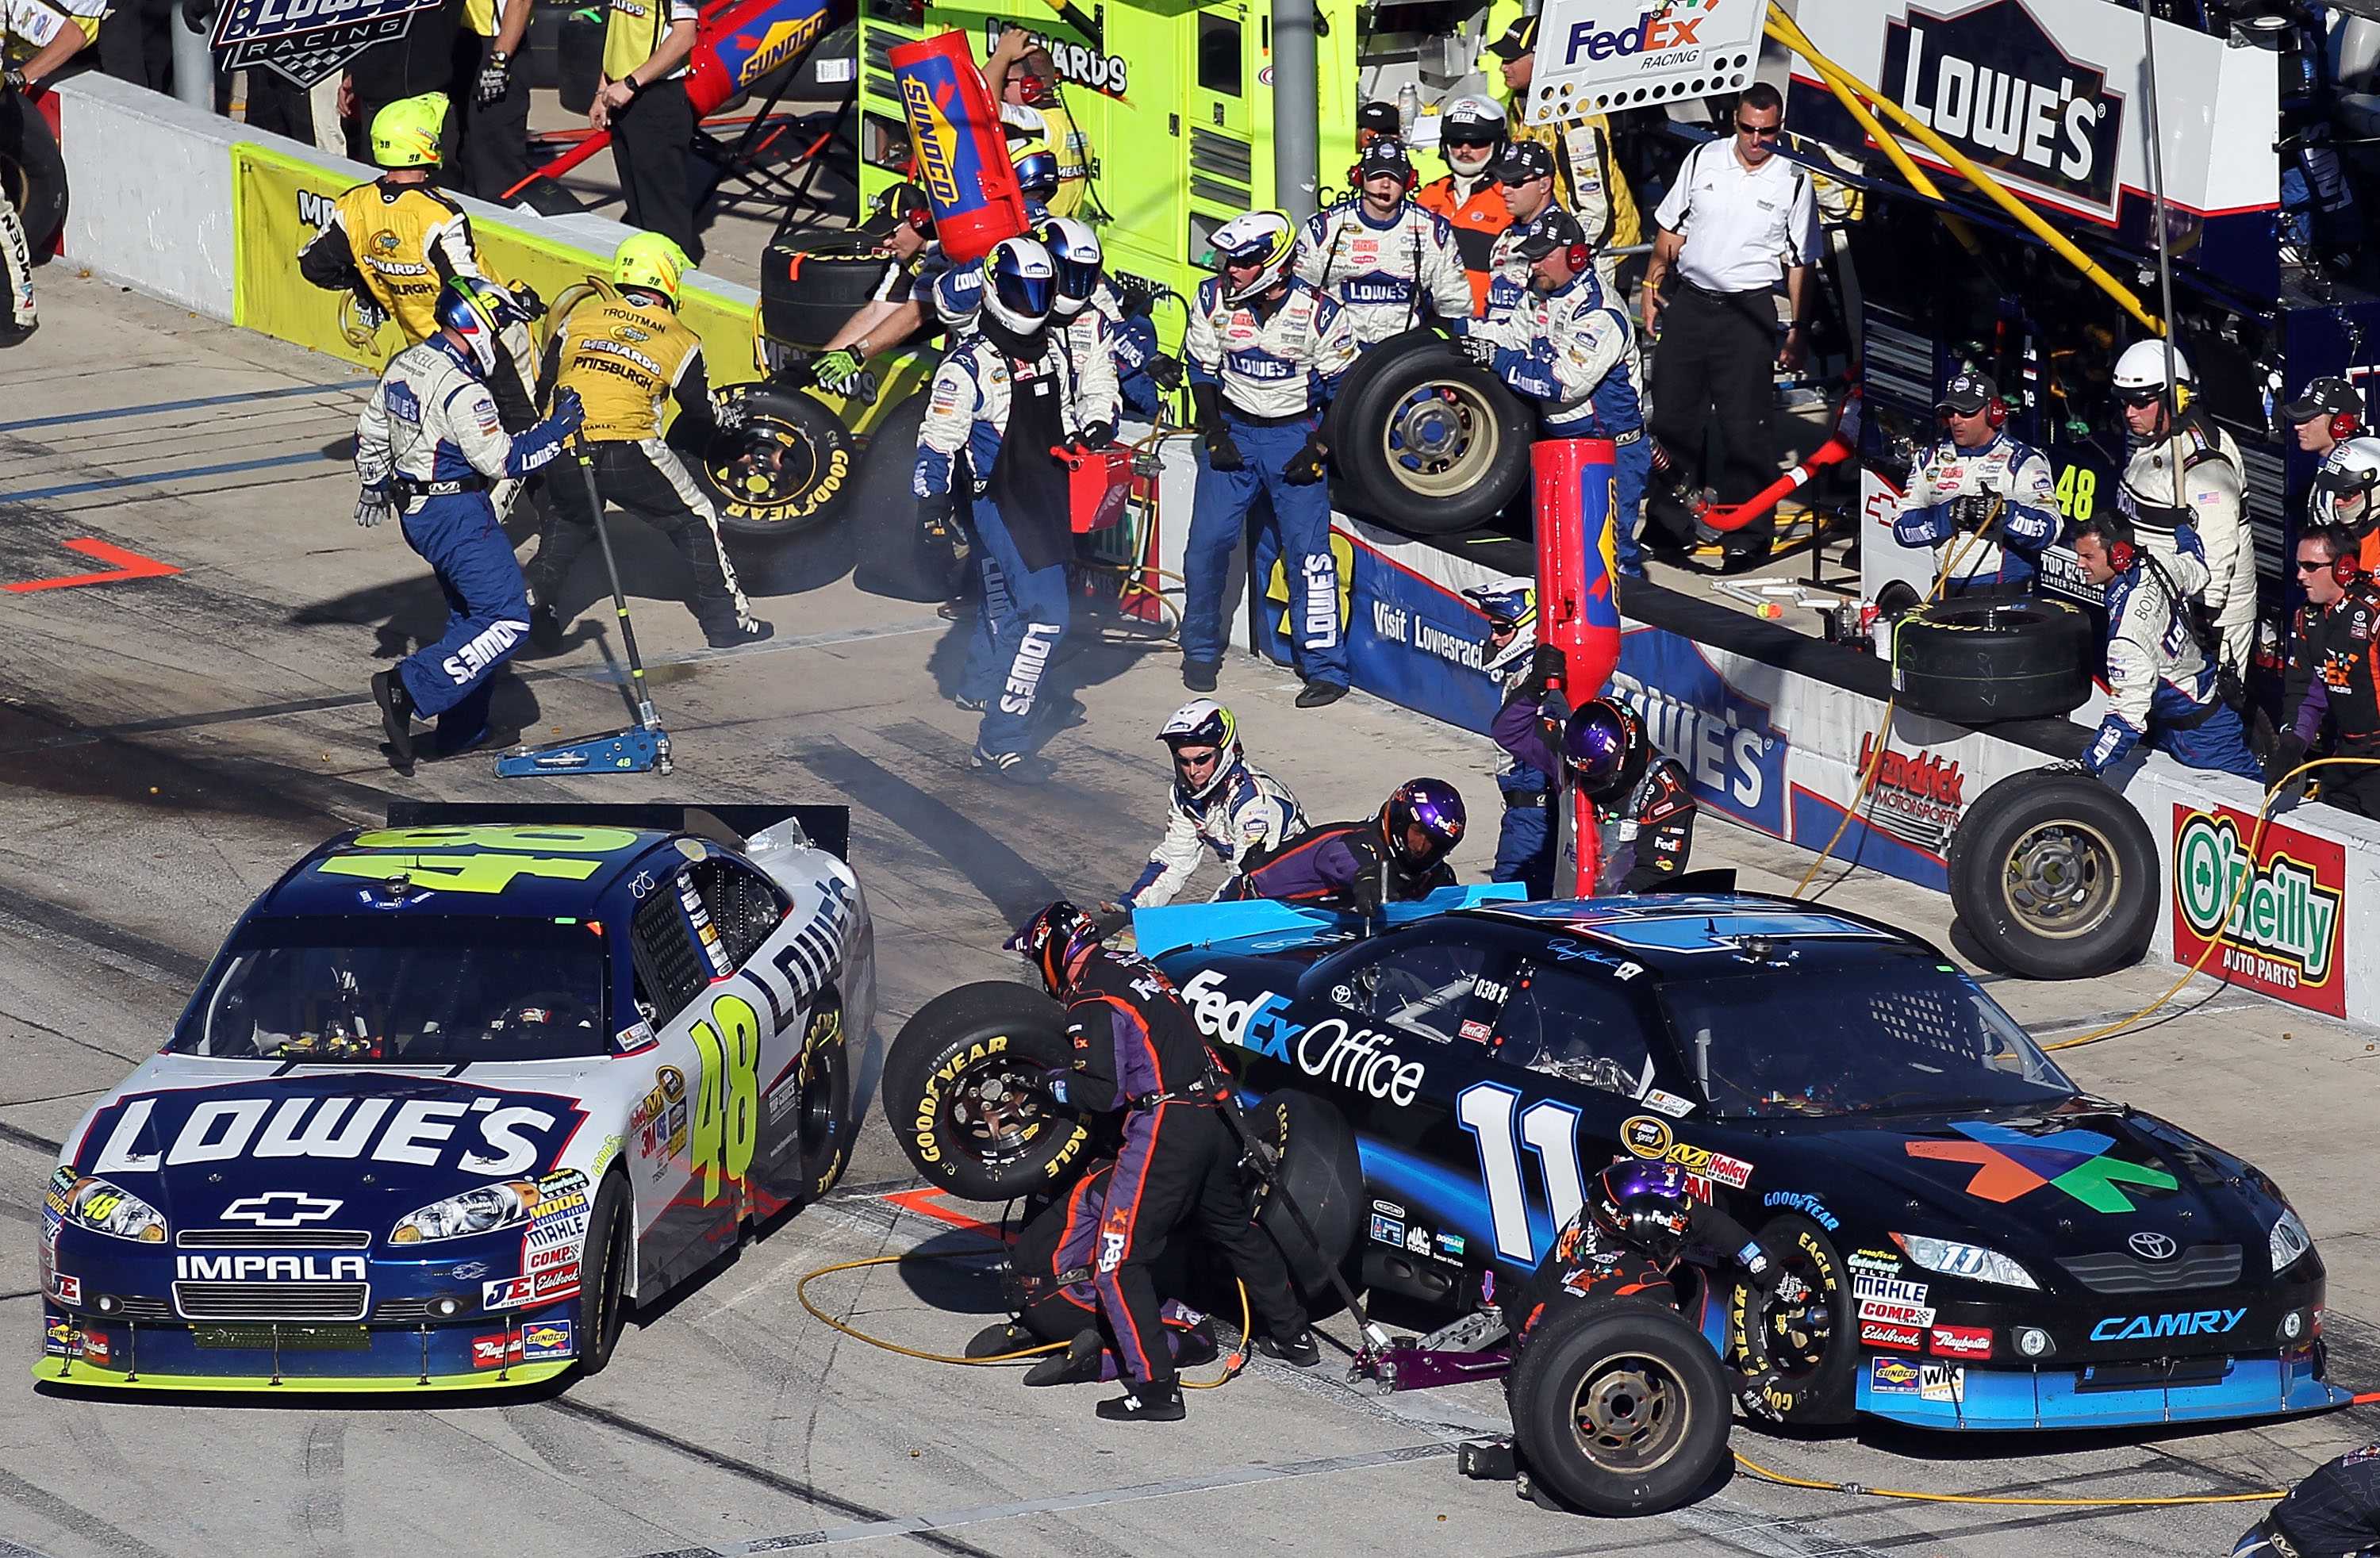 FORT WORTH, TX - NOVEMBER 07:  Jimmie Johnson, driver of the #48 Lowe's Chevrolet, pulls out of his pit as Denny Hamlin, driver of the #11 FedEx Office Toyota, makes a pit stop during the NASCAR Sprint Cup Series AAA Texas 500 at Texas Motor Speedway on N